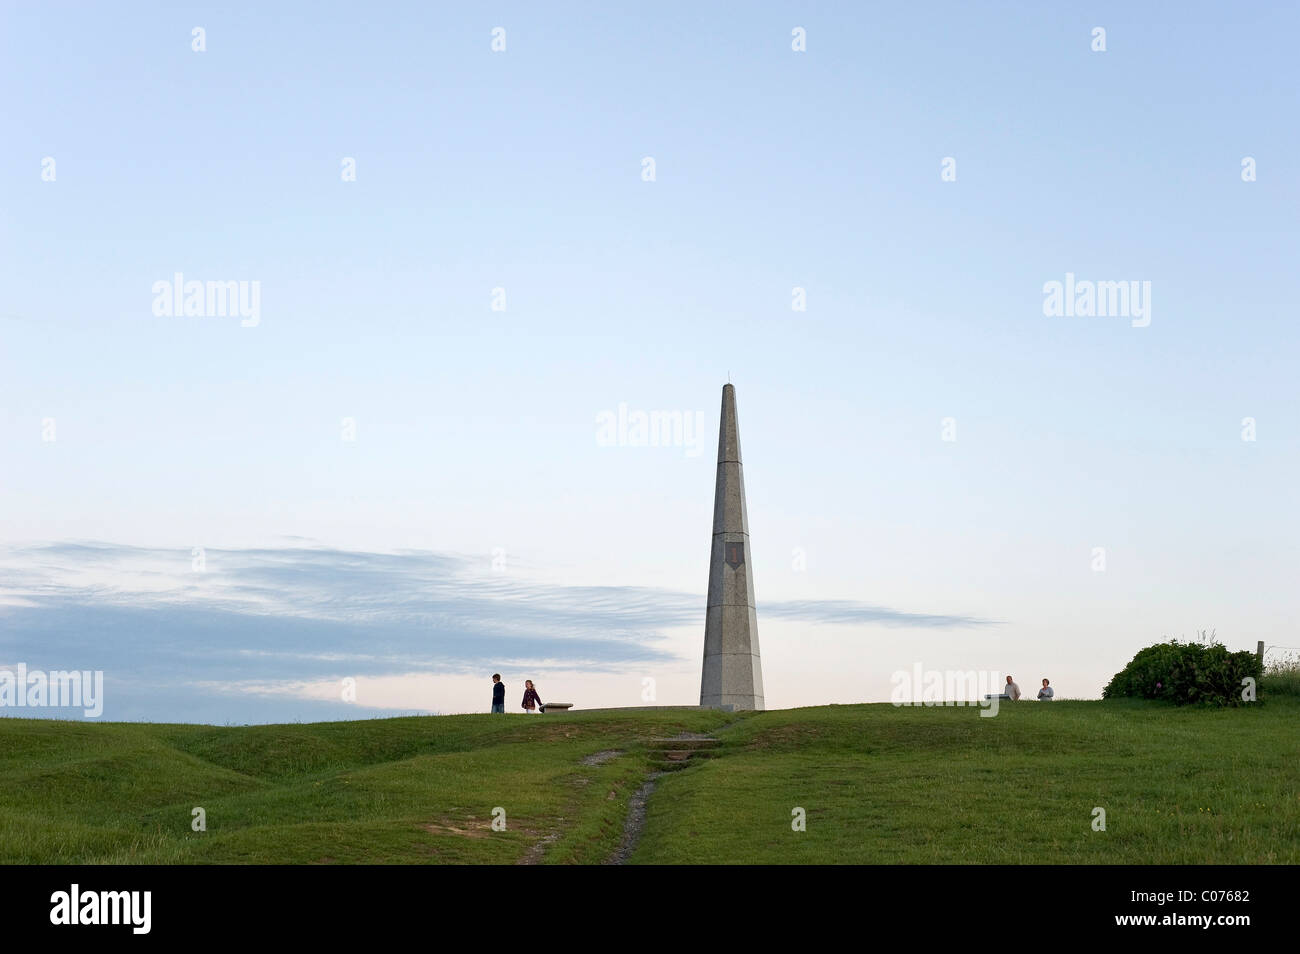 Memorial obelisk for the 1st Division of the U.S. forces at Omaha Beach near Colleville sur Mer, Normandy, France, Europe Stock Photo